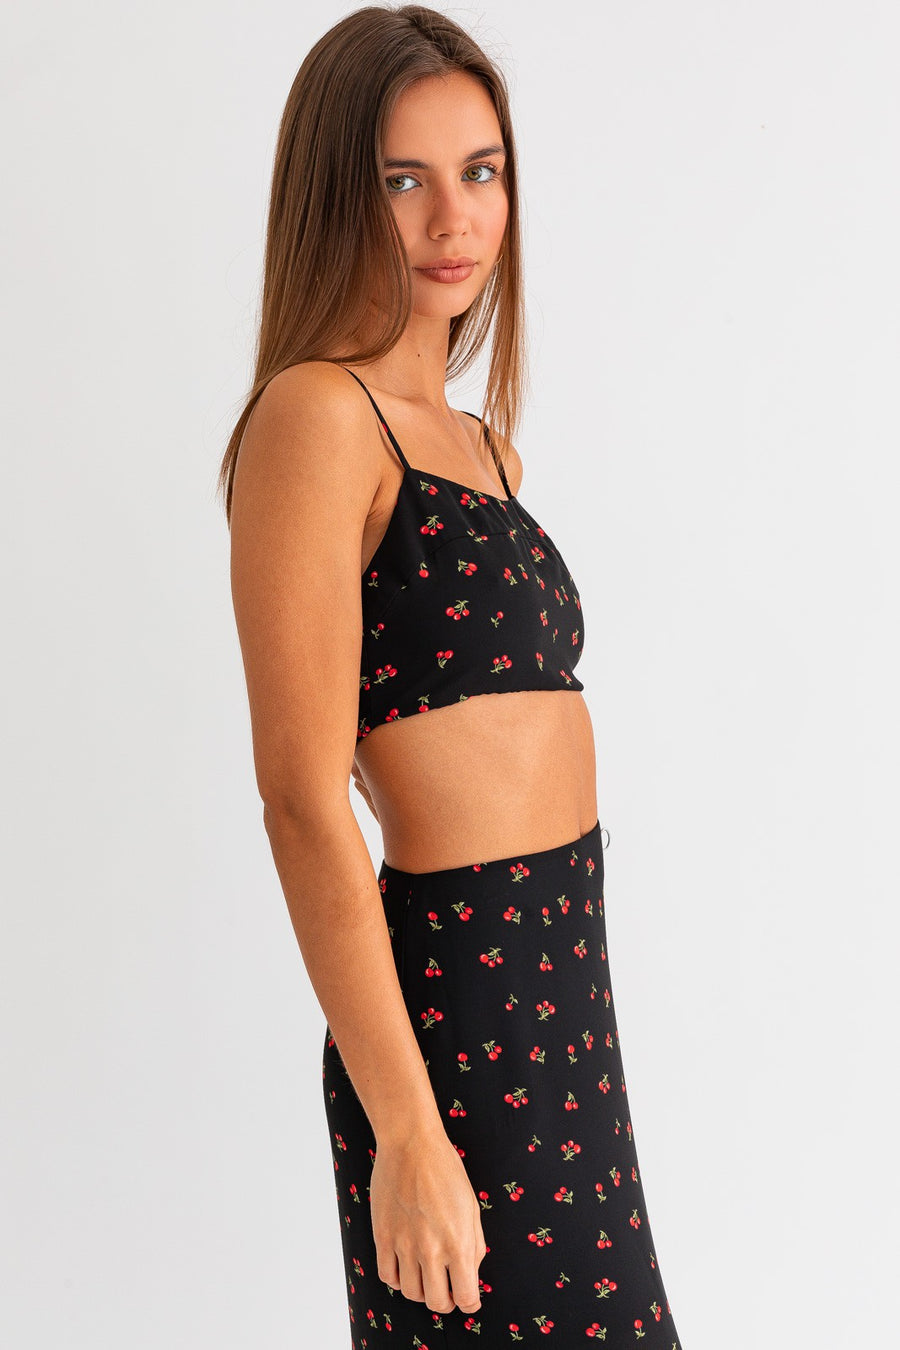 Cropped tank with cherries in the color black-red.